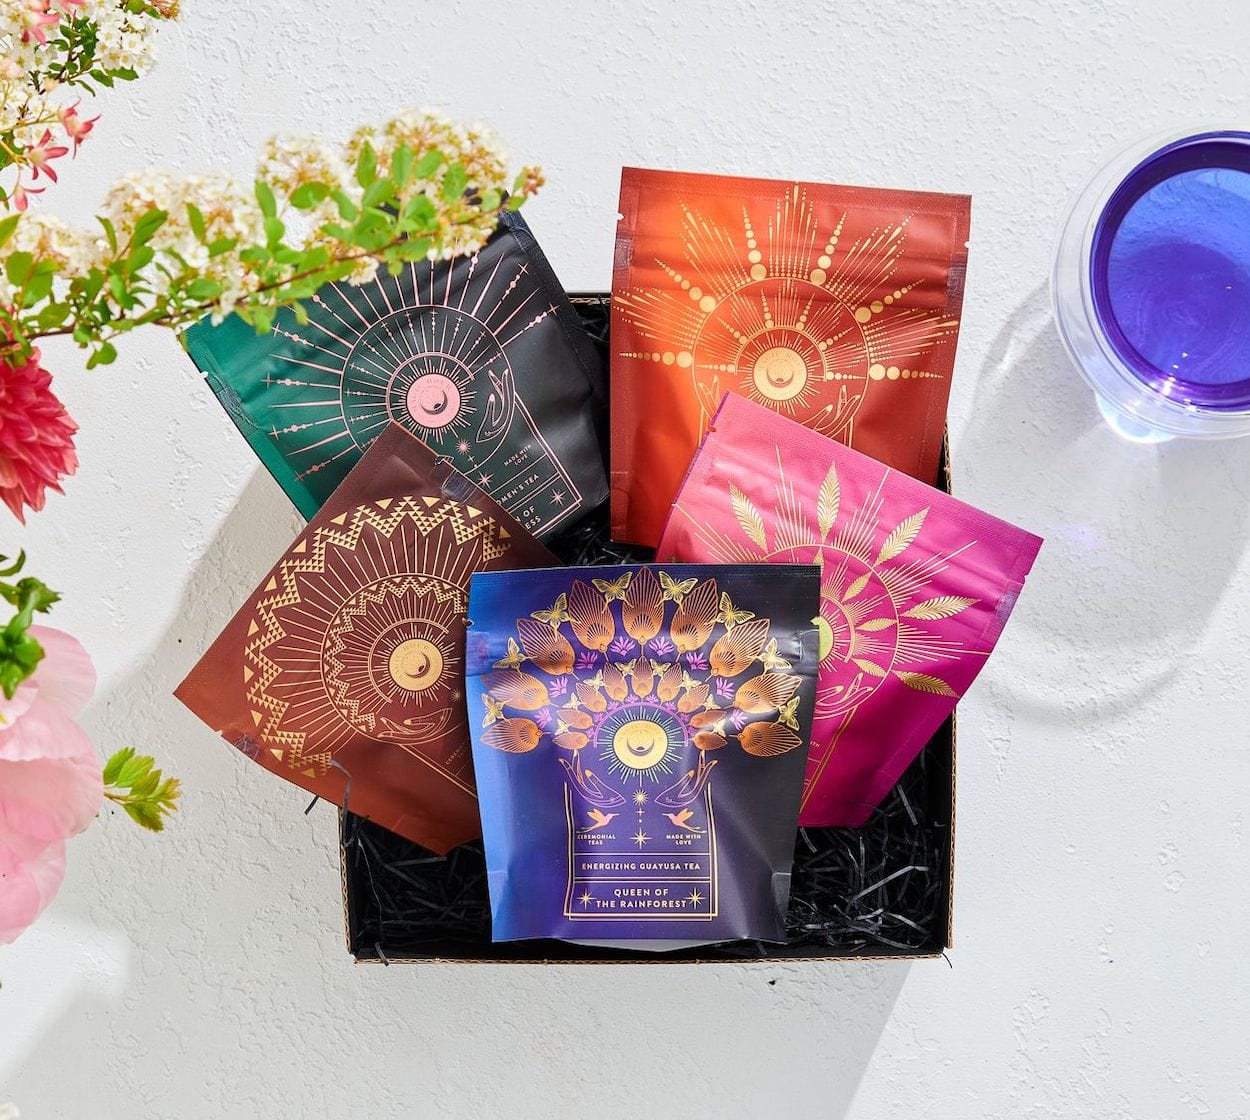 A black gift box containing five colorful packets with intricate gold designs is displayed on a white surface. Surrounding the box are a pink flower and green foliage on the left and a purple-tinted drinking glass on the right, perfect for savoring The Queen's Sampler Set by Magic Hour.